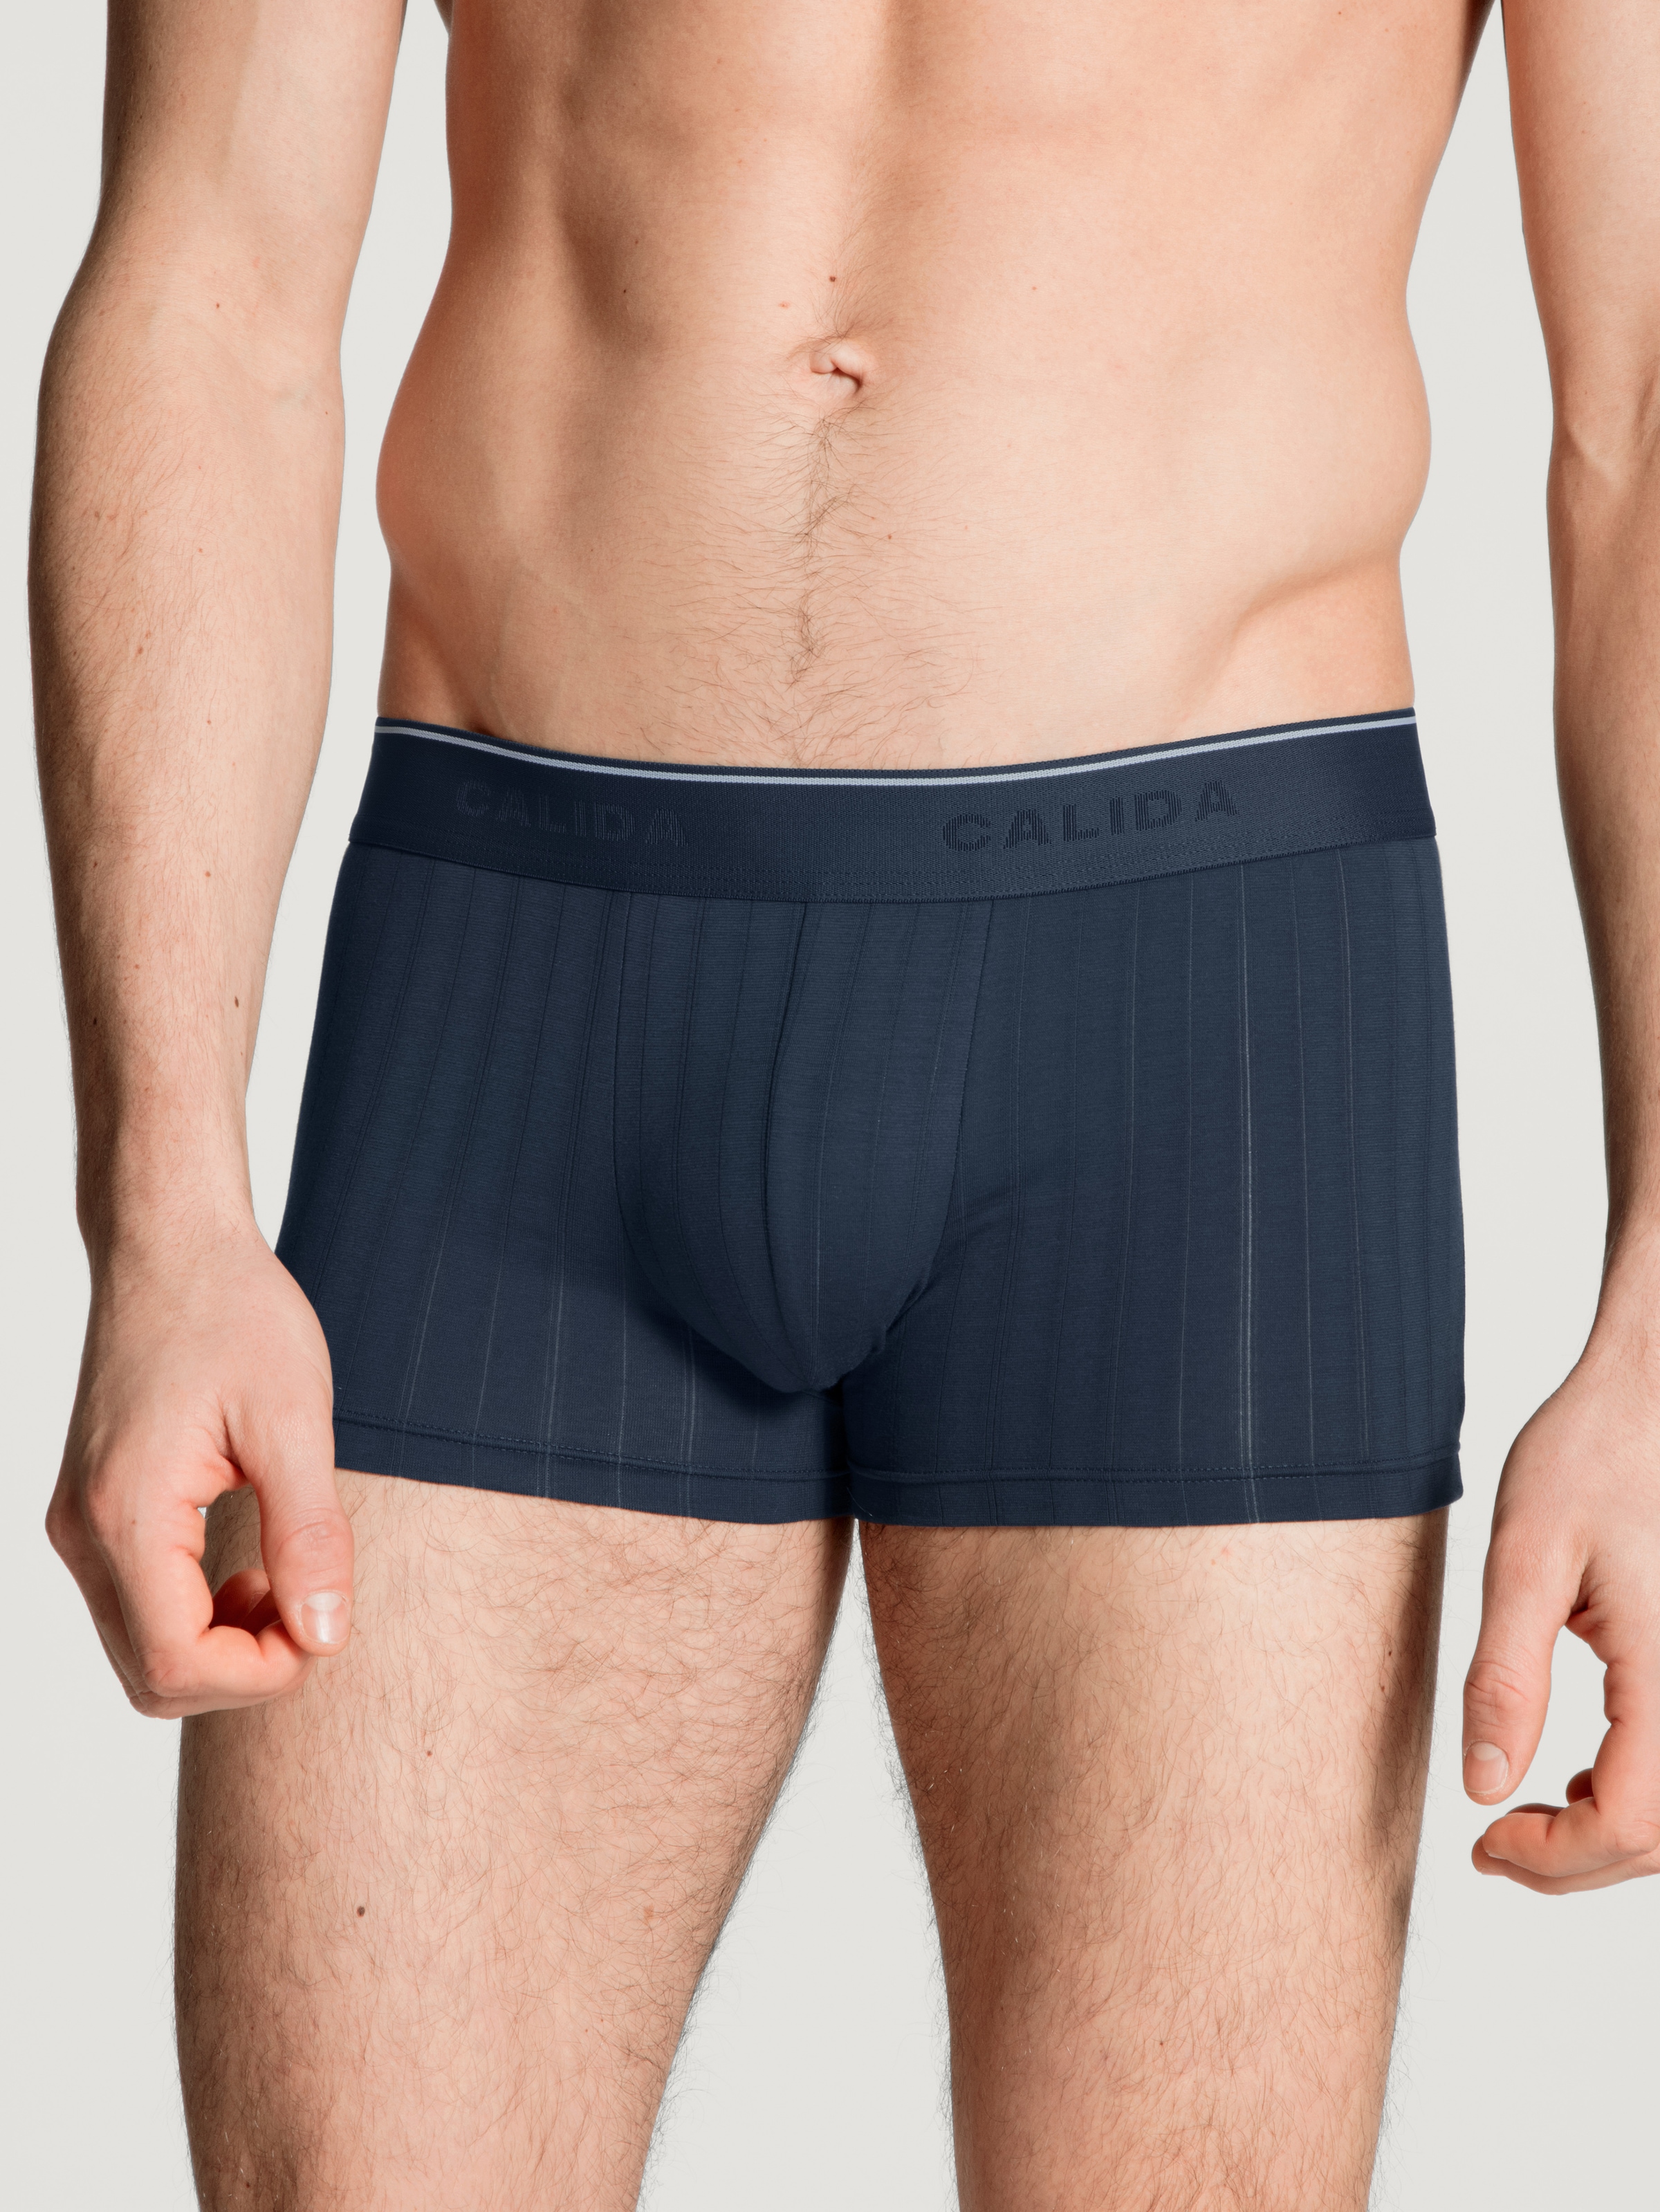 CALIDA Boxershorts »Pure & Style«, (Packung, 3 St.), Boxer Brief im attraktiven 3er-Pack